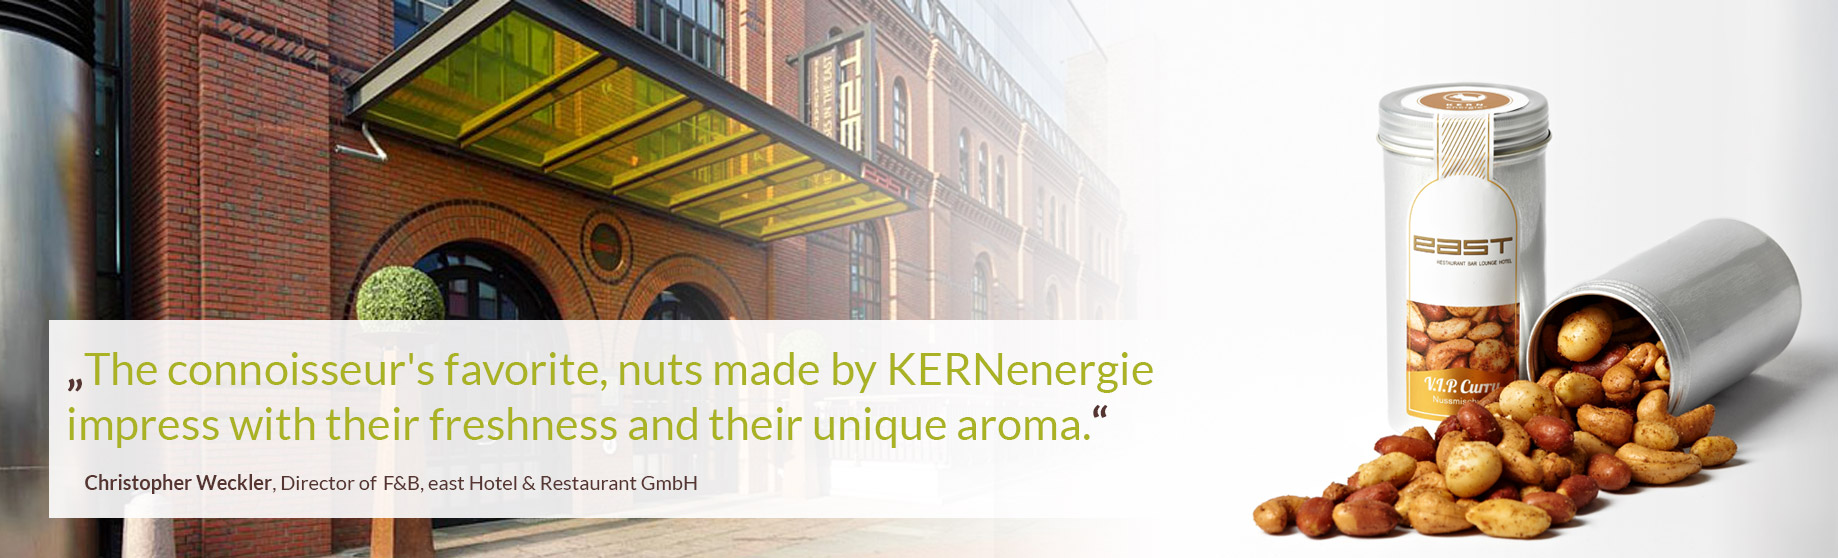 KERNenergie for Companies